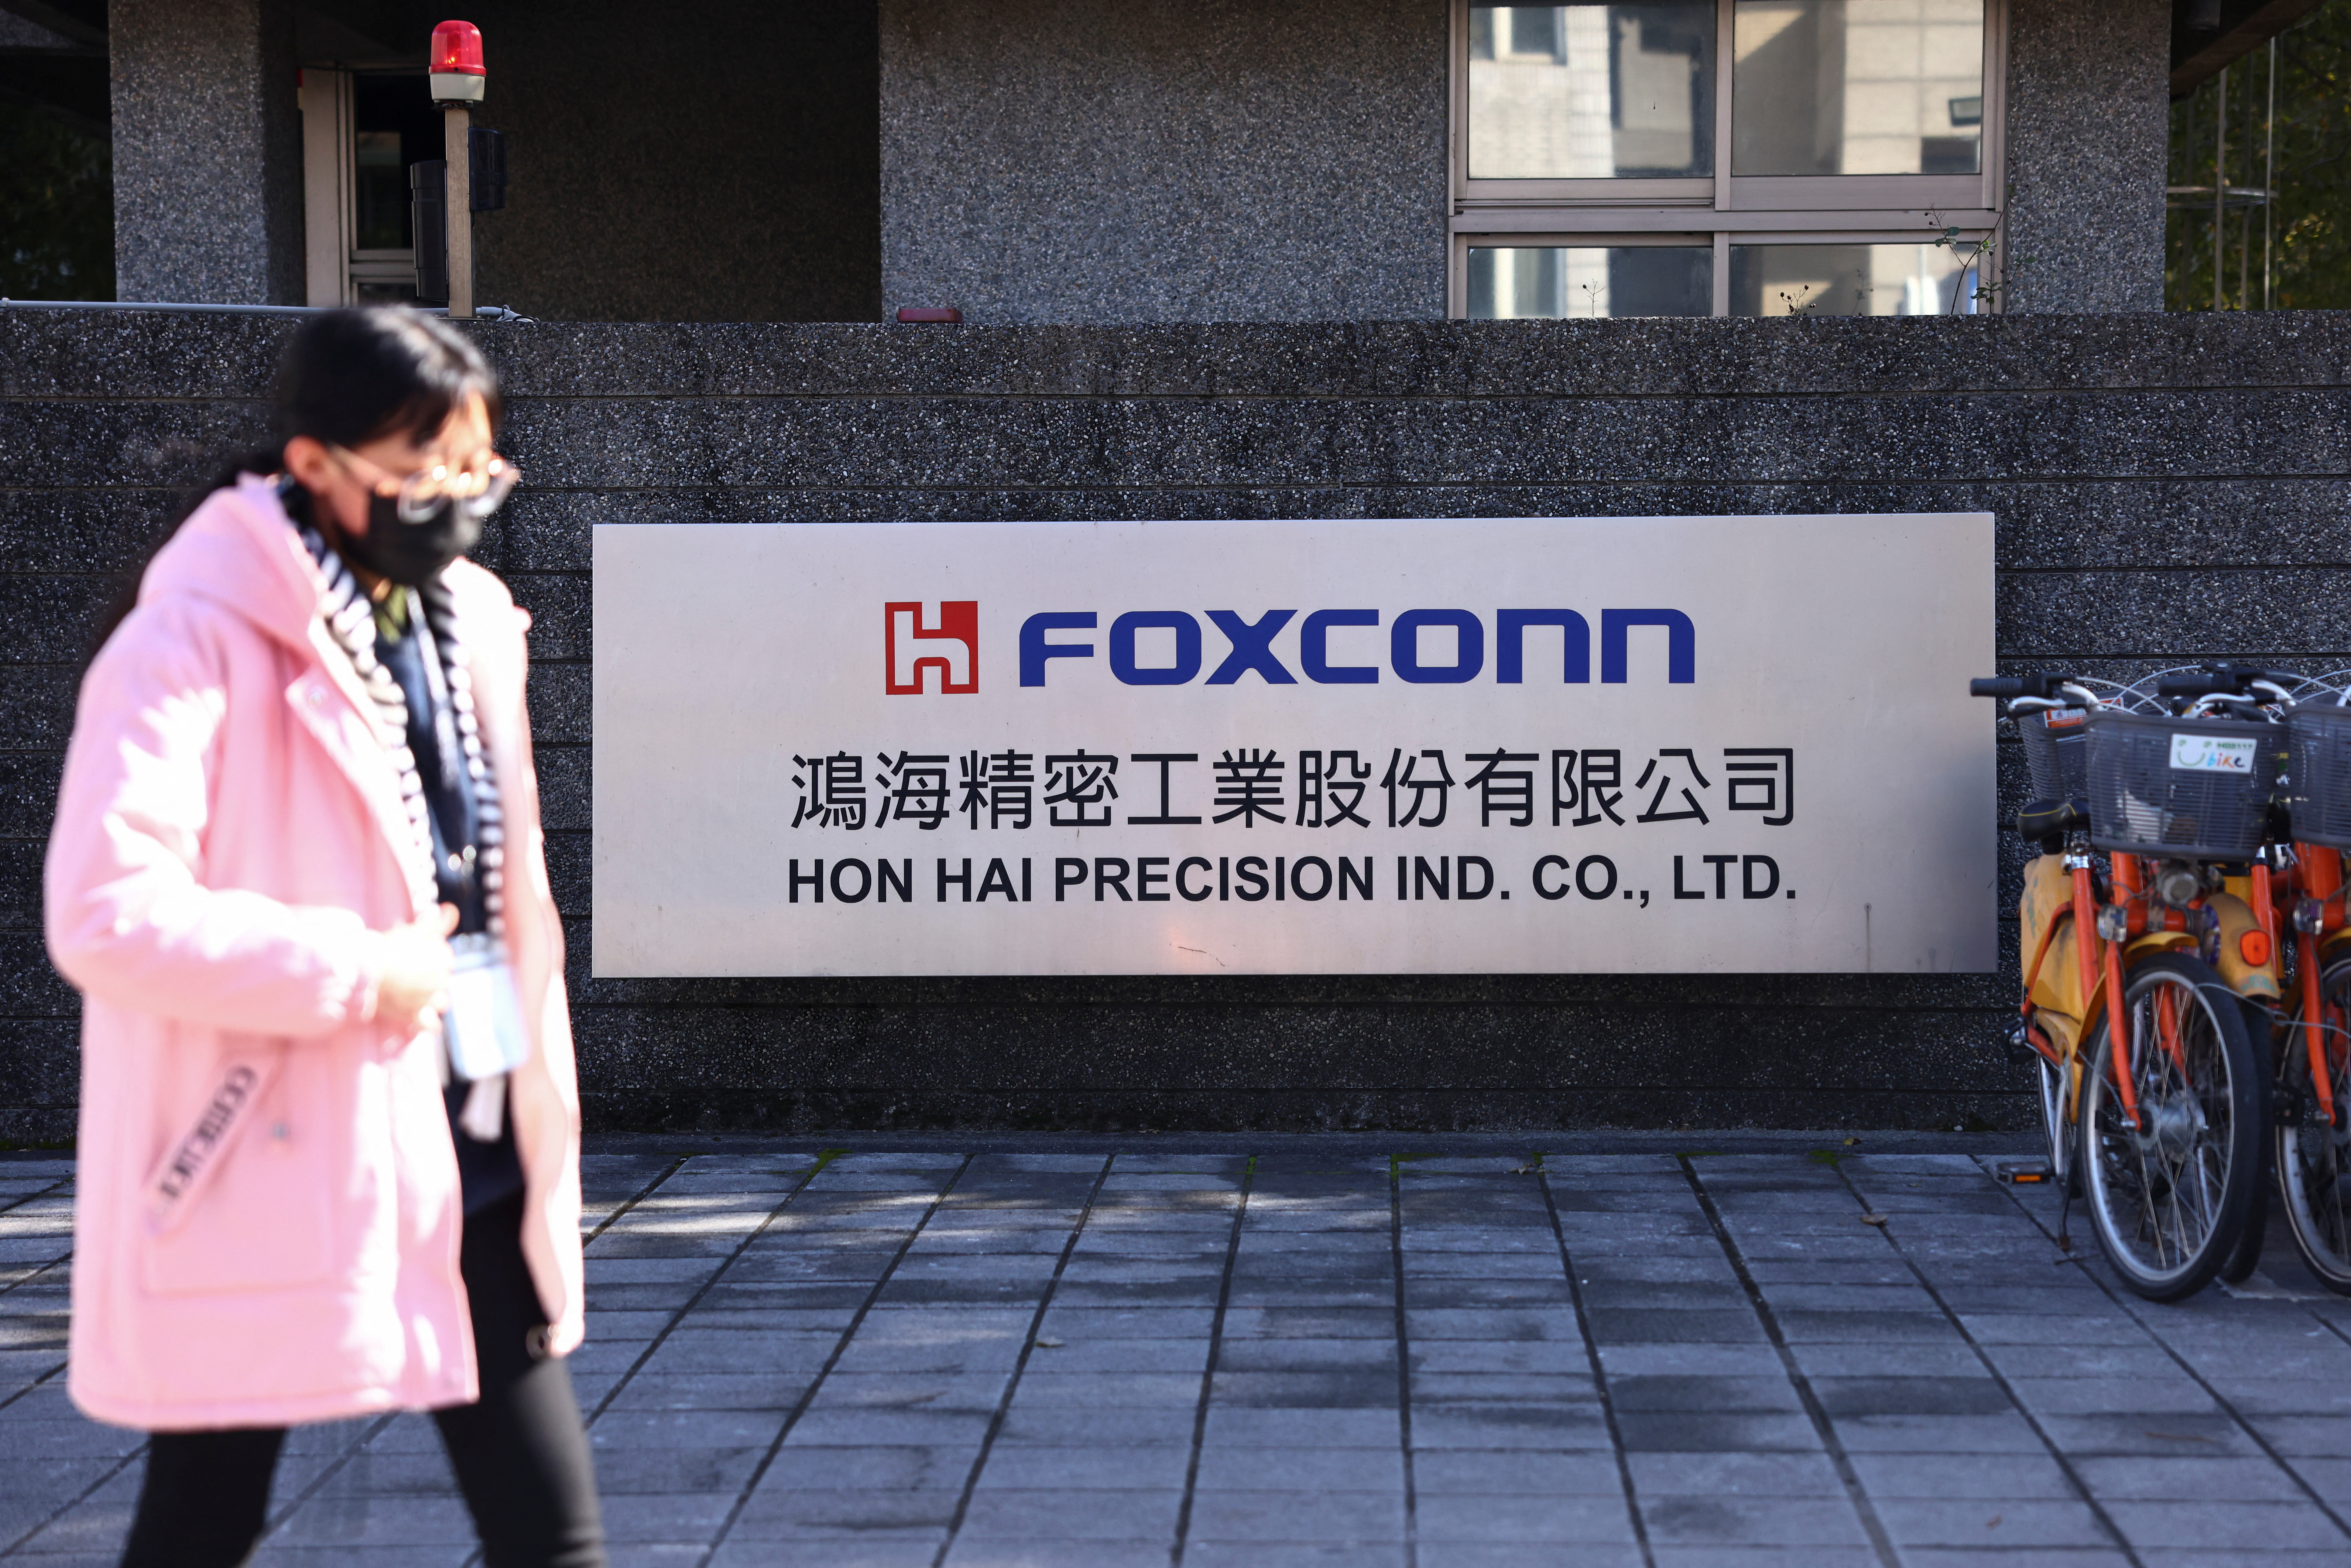 A woman walks past the logo of Foxconn outside a company's building, in New Taipe City